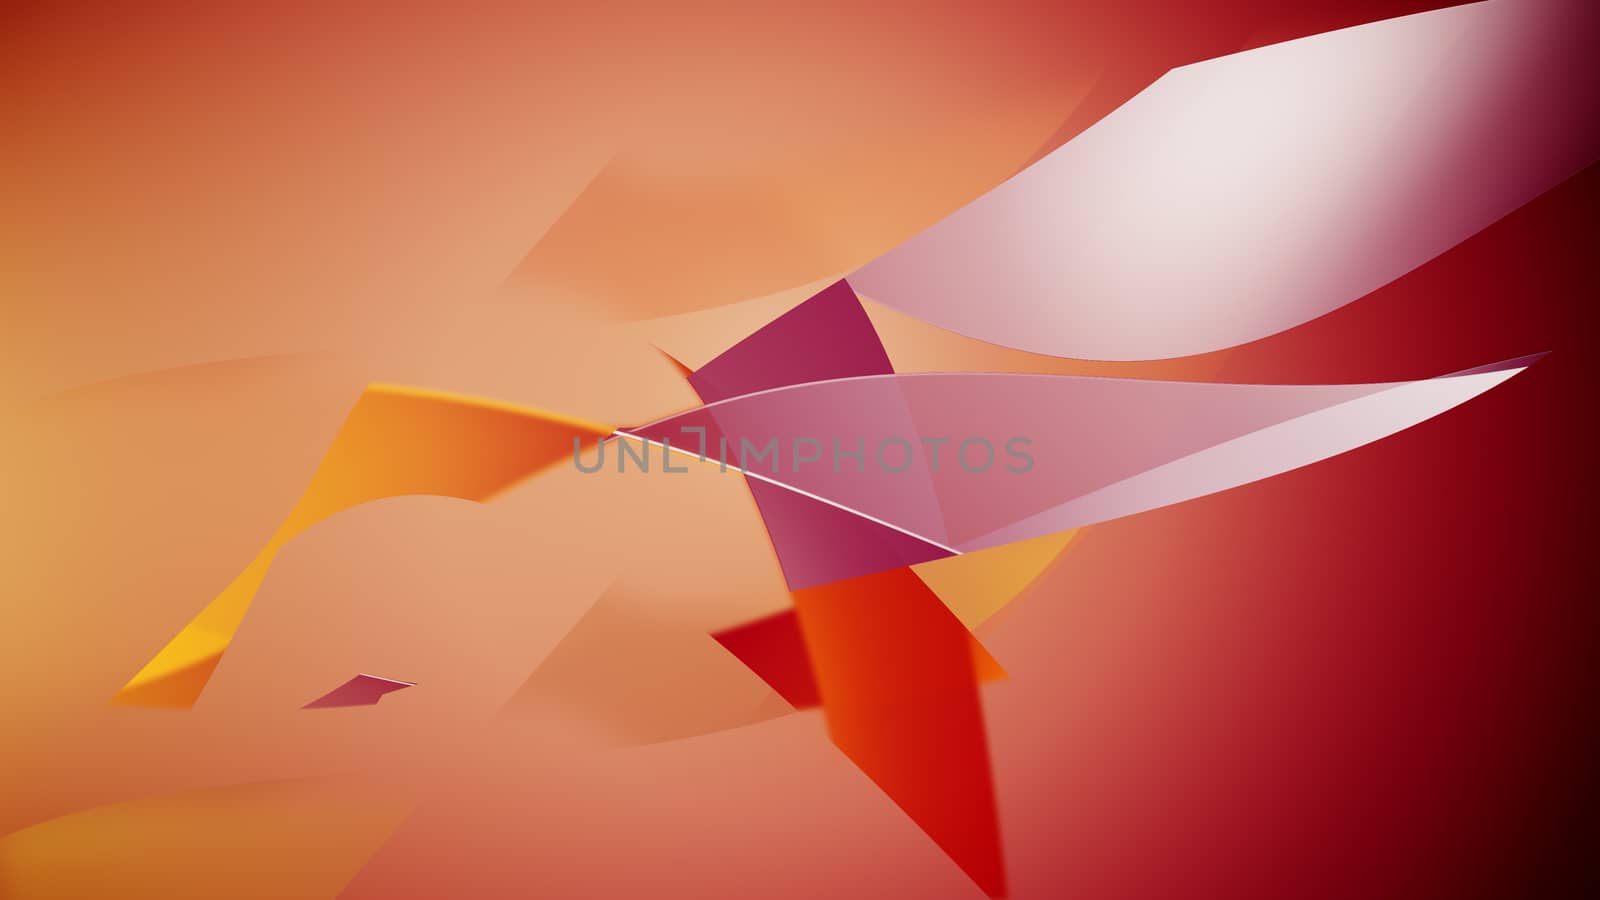 Abstract elements on an orange background. 3d illustration.